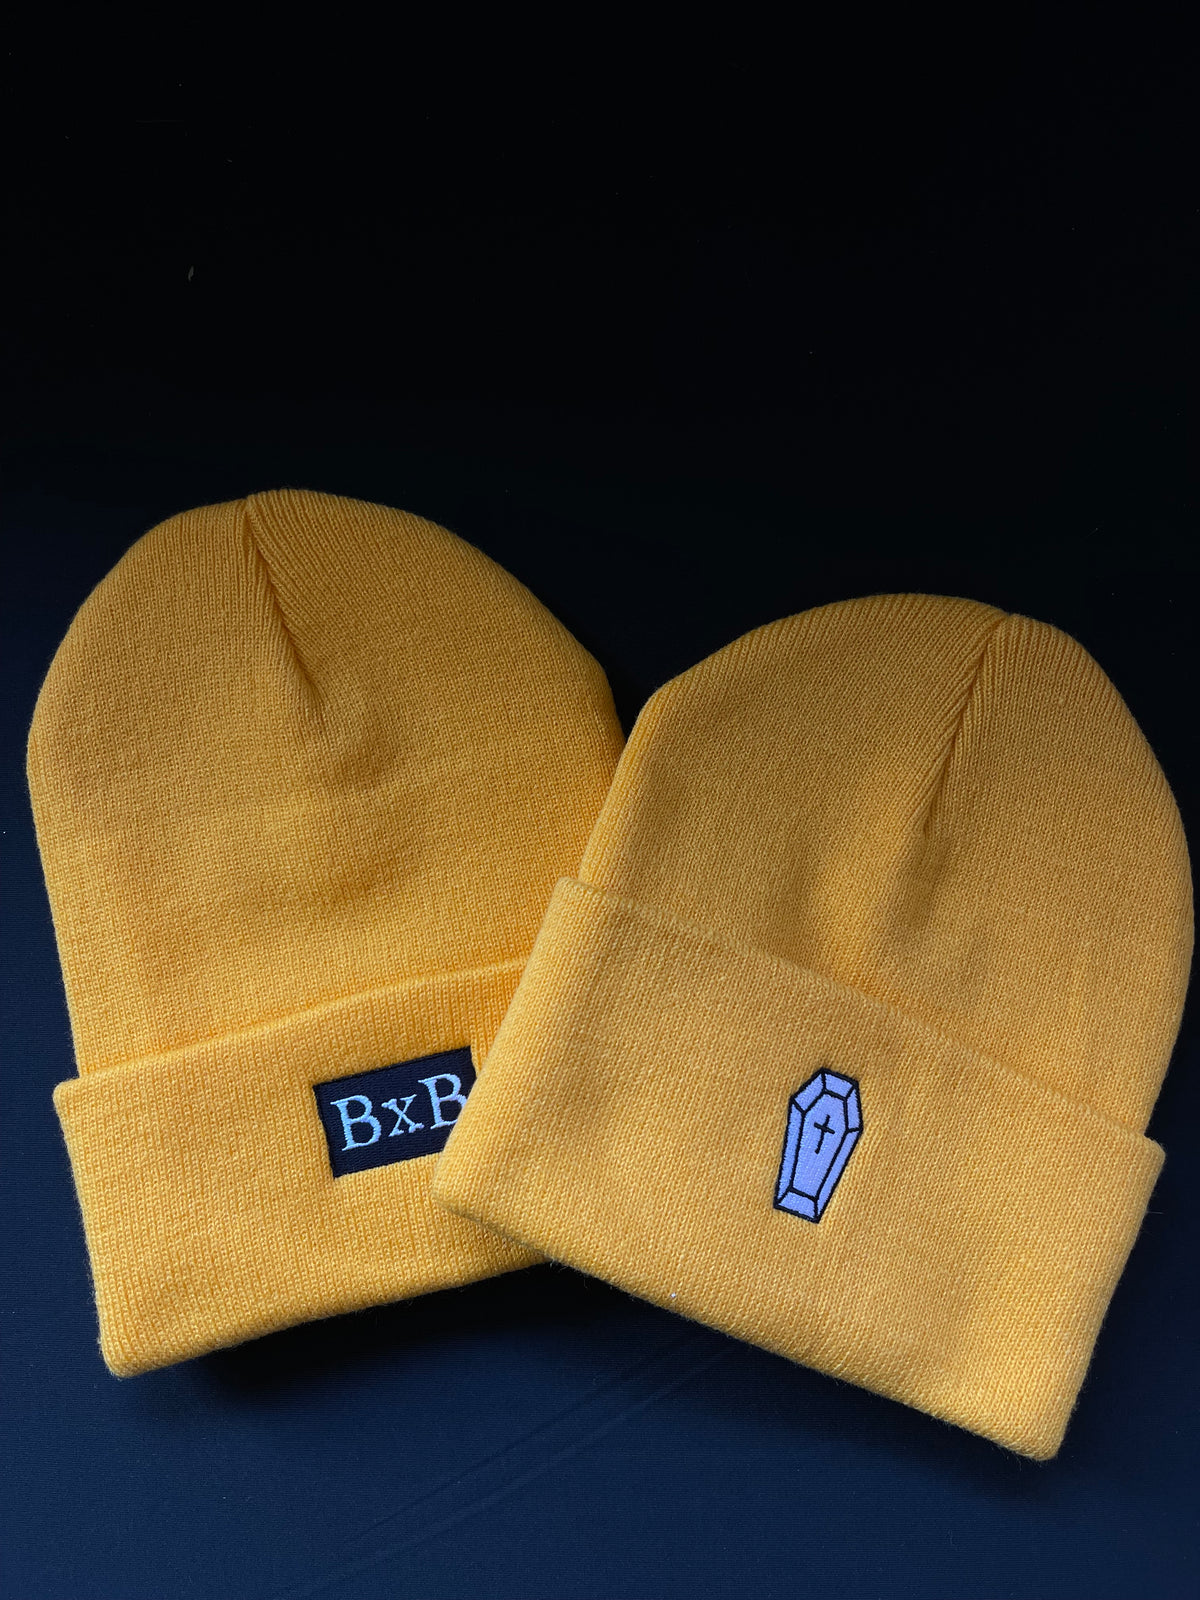 Crypt Keeper's Reversible Beanie